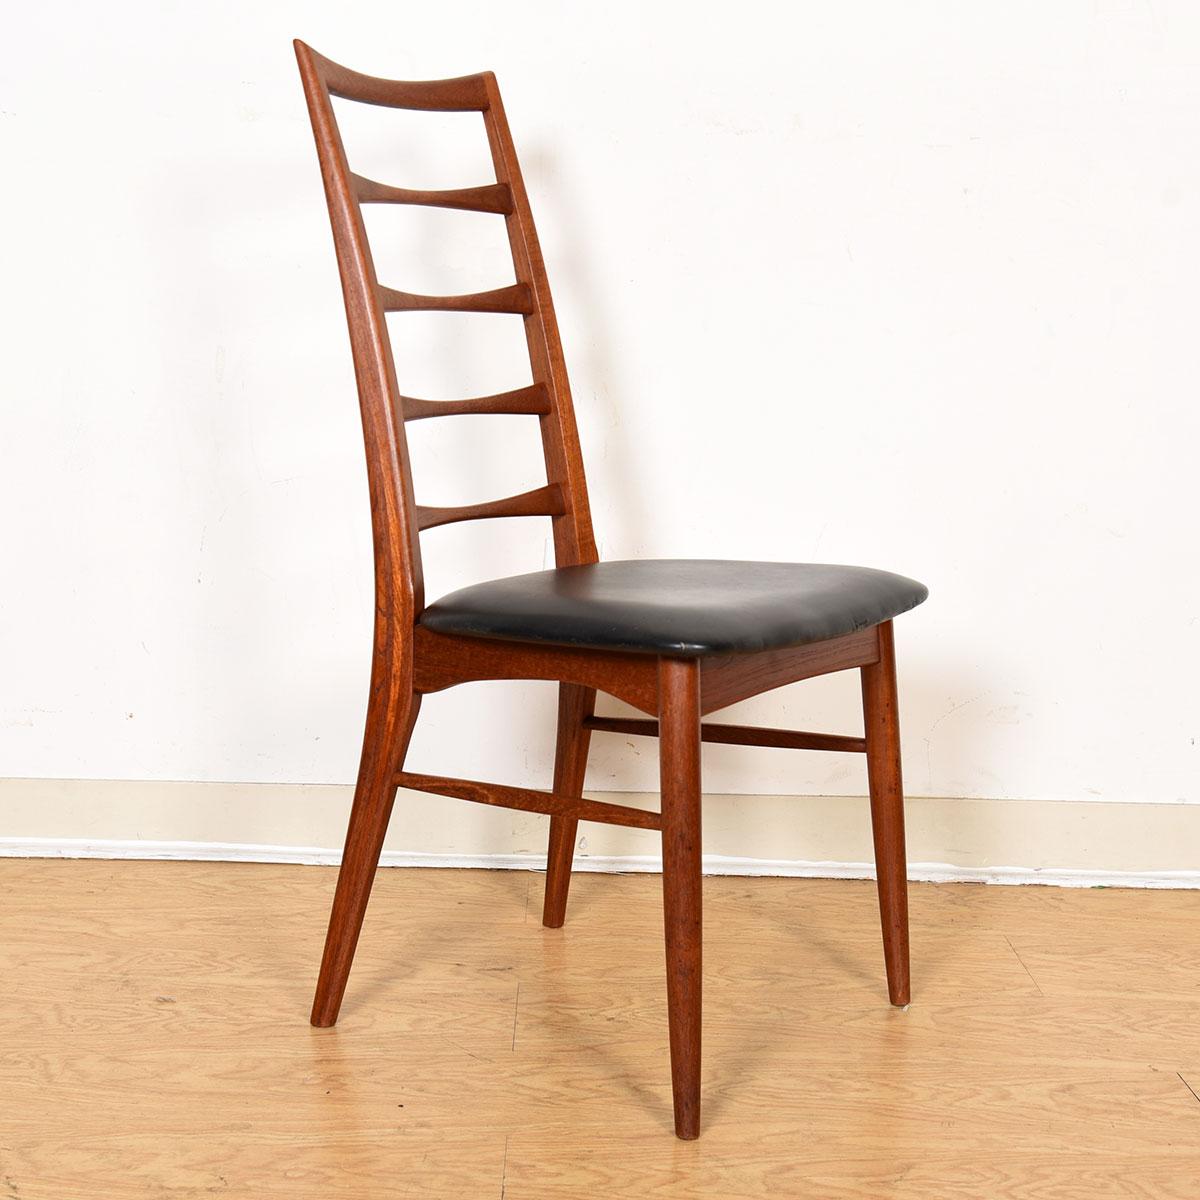 Set of 4 Danish Teak Side Dining Chairs by Koefoeds Hornslet In Excellent Condition For Sale In Kensington, MD